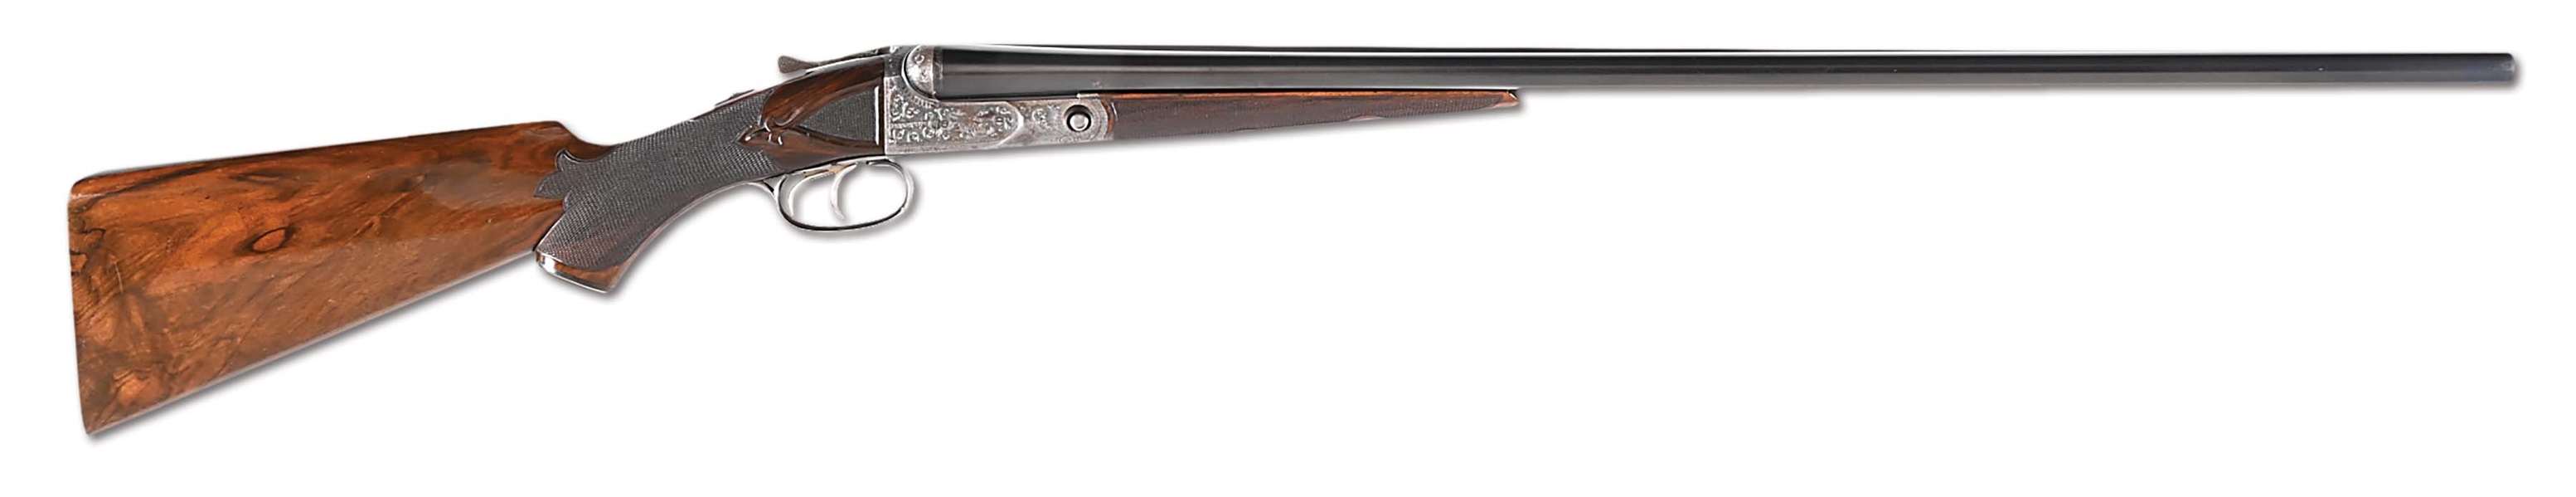 (C) RARE, AWARD WINNING PARKER BROTHERS BHE 16 BORE SIDE BY SIDE SHOGTUN.